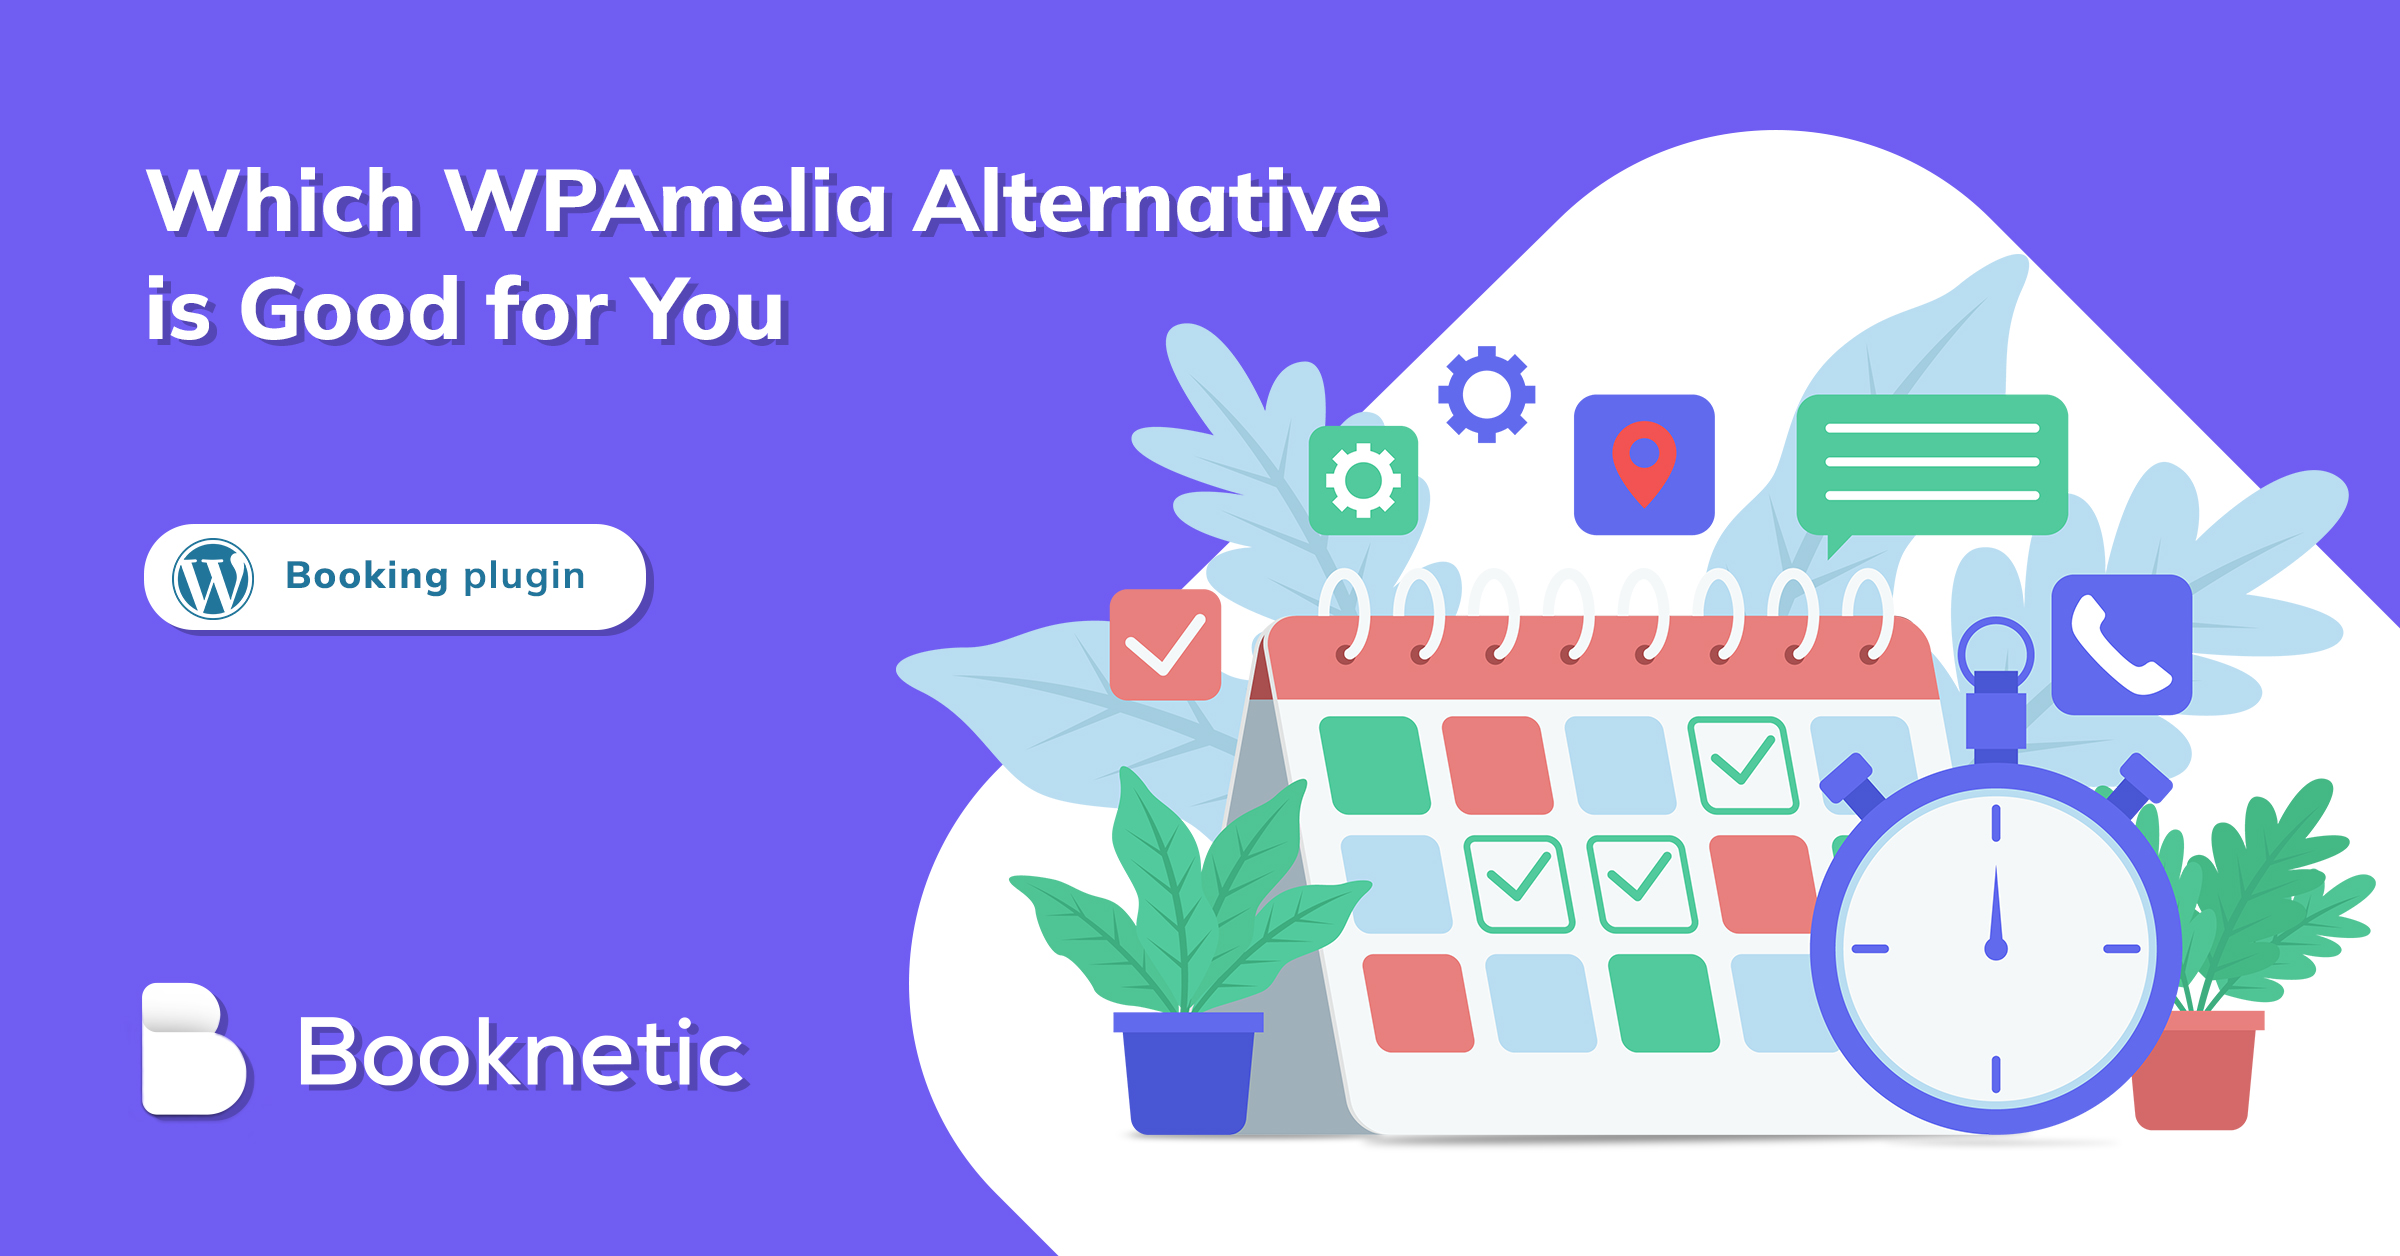 Which WPAmelia Alternative is Good For You?